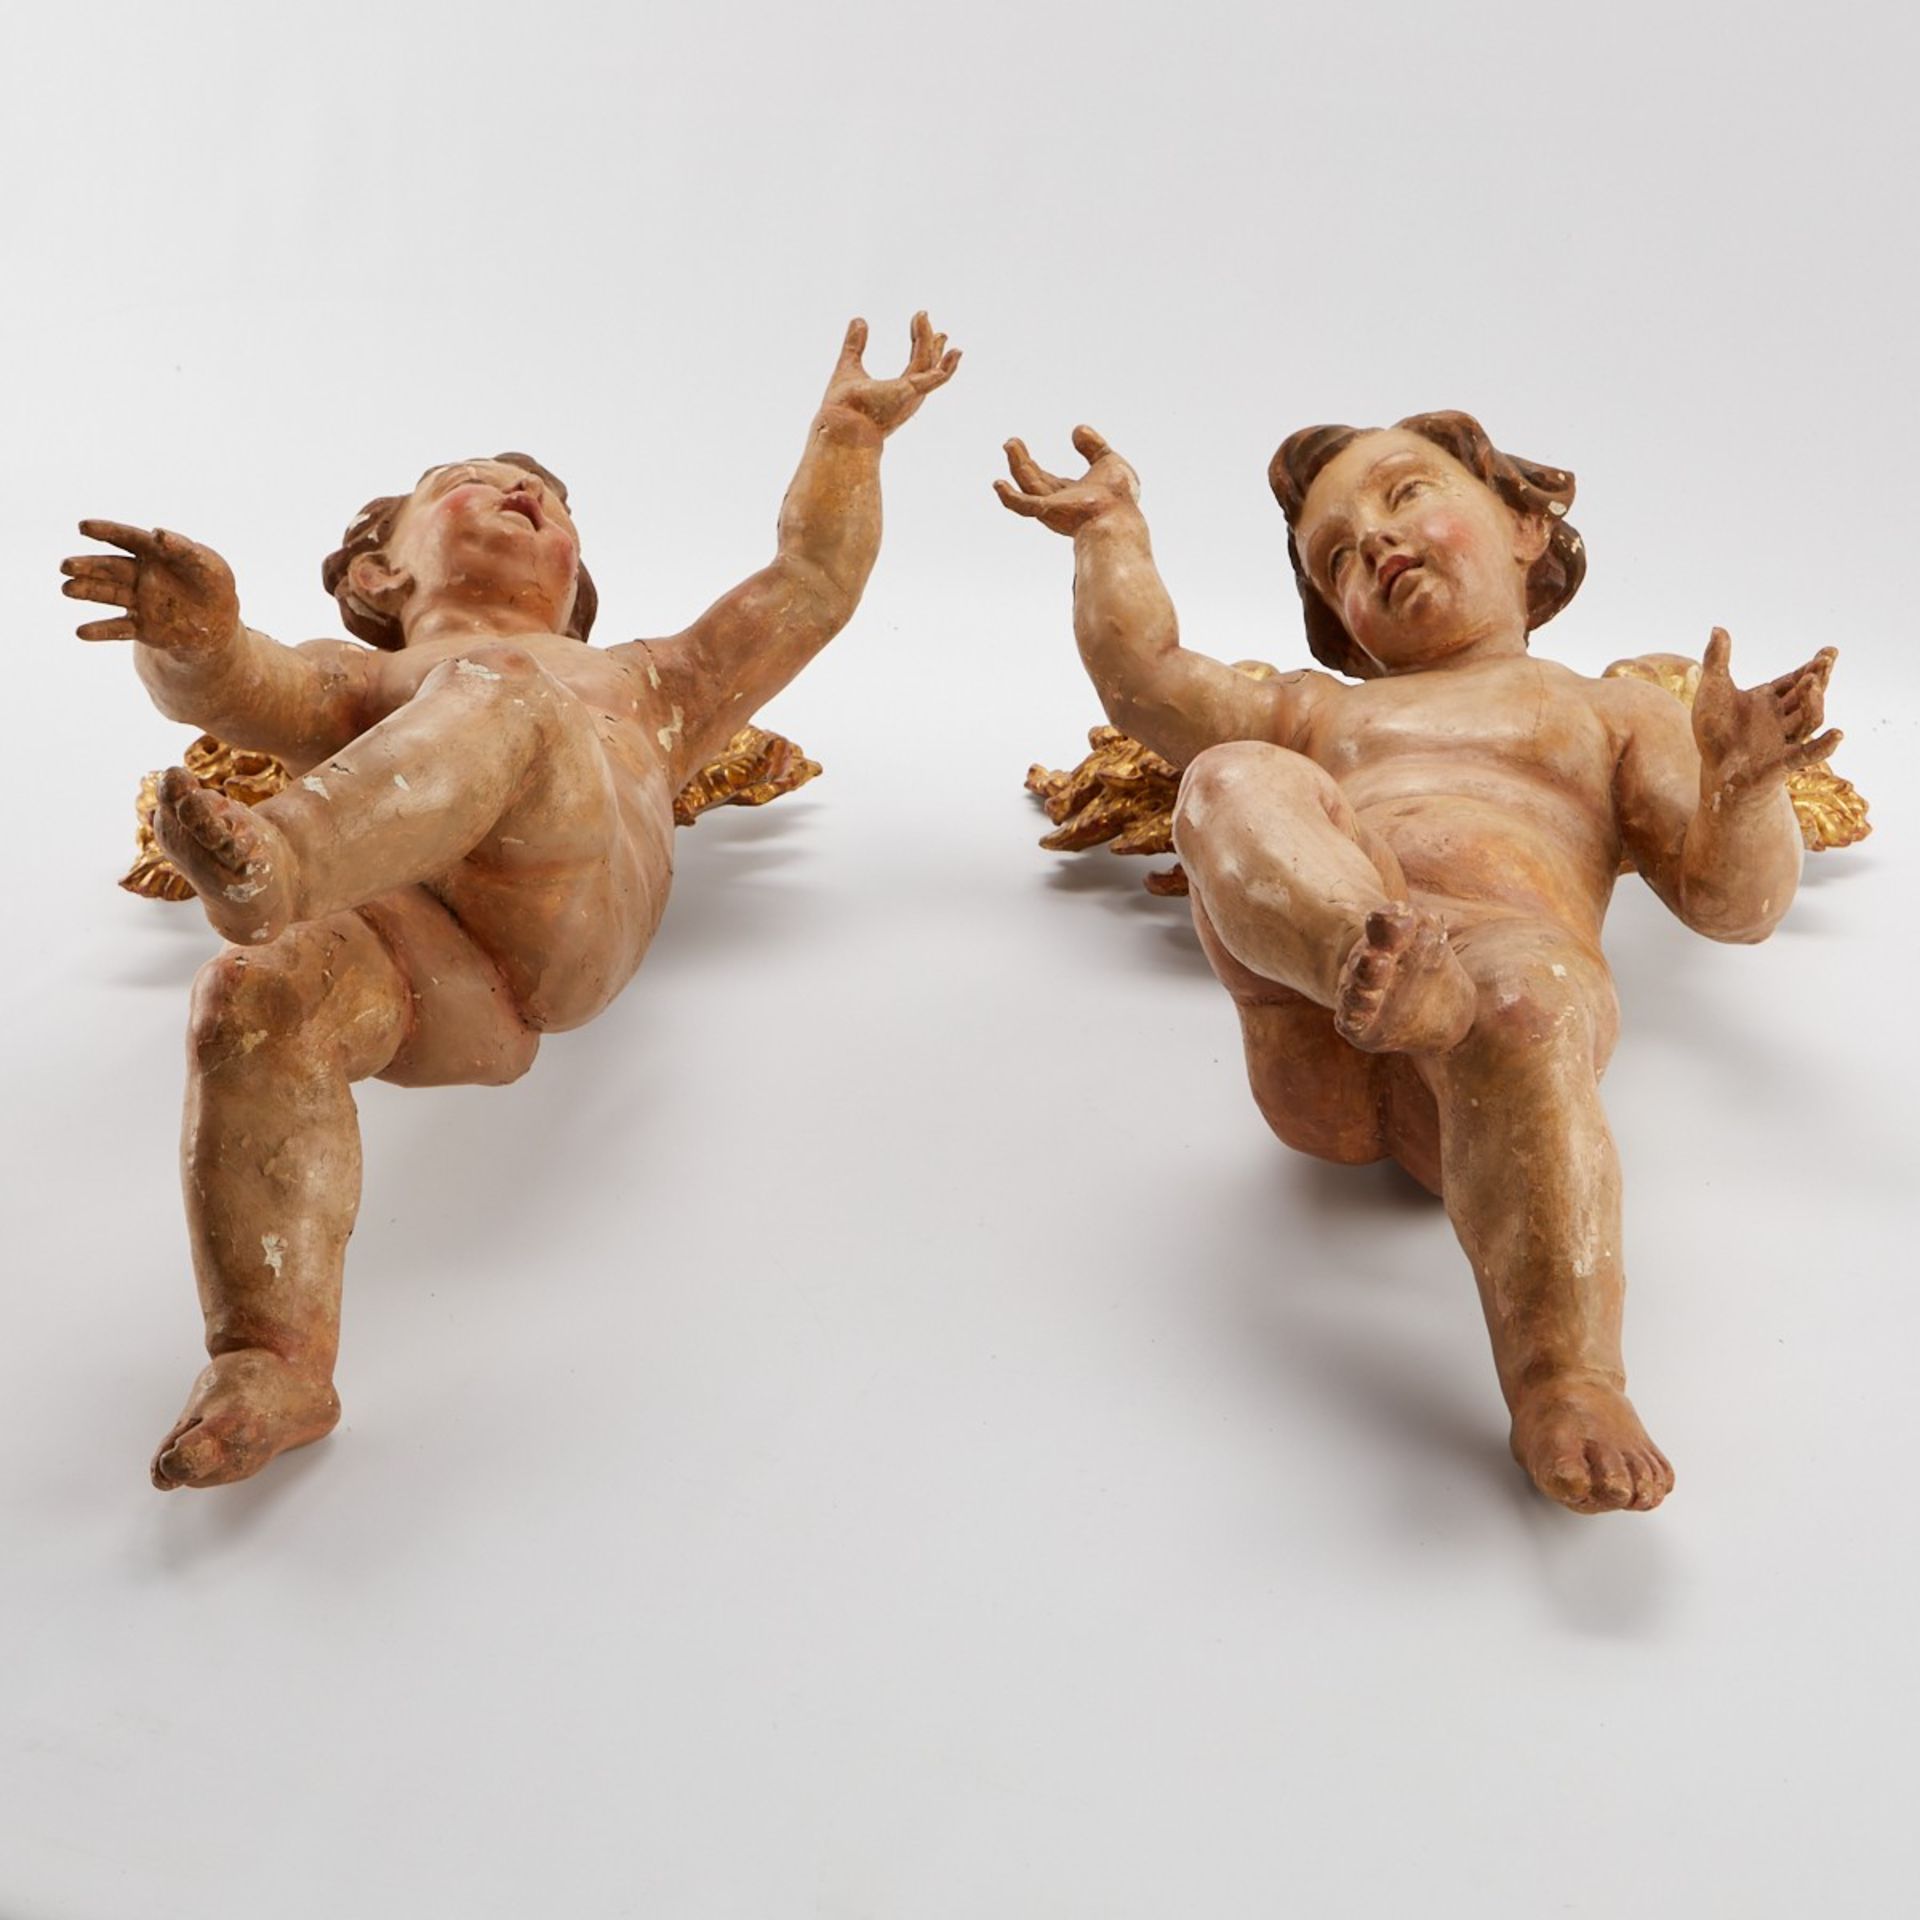 Pr Lrg 18th/19th c. Continental Wooden Angels - Image 6 of 9